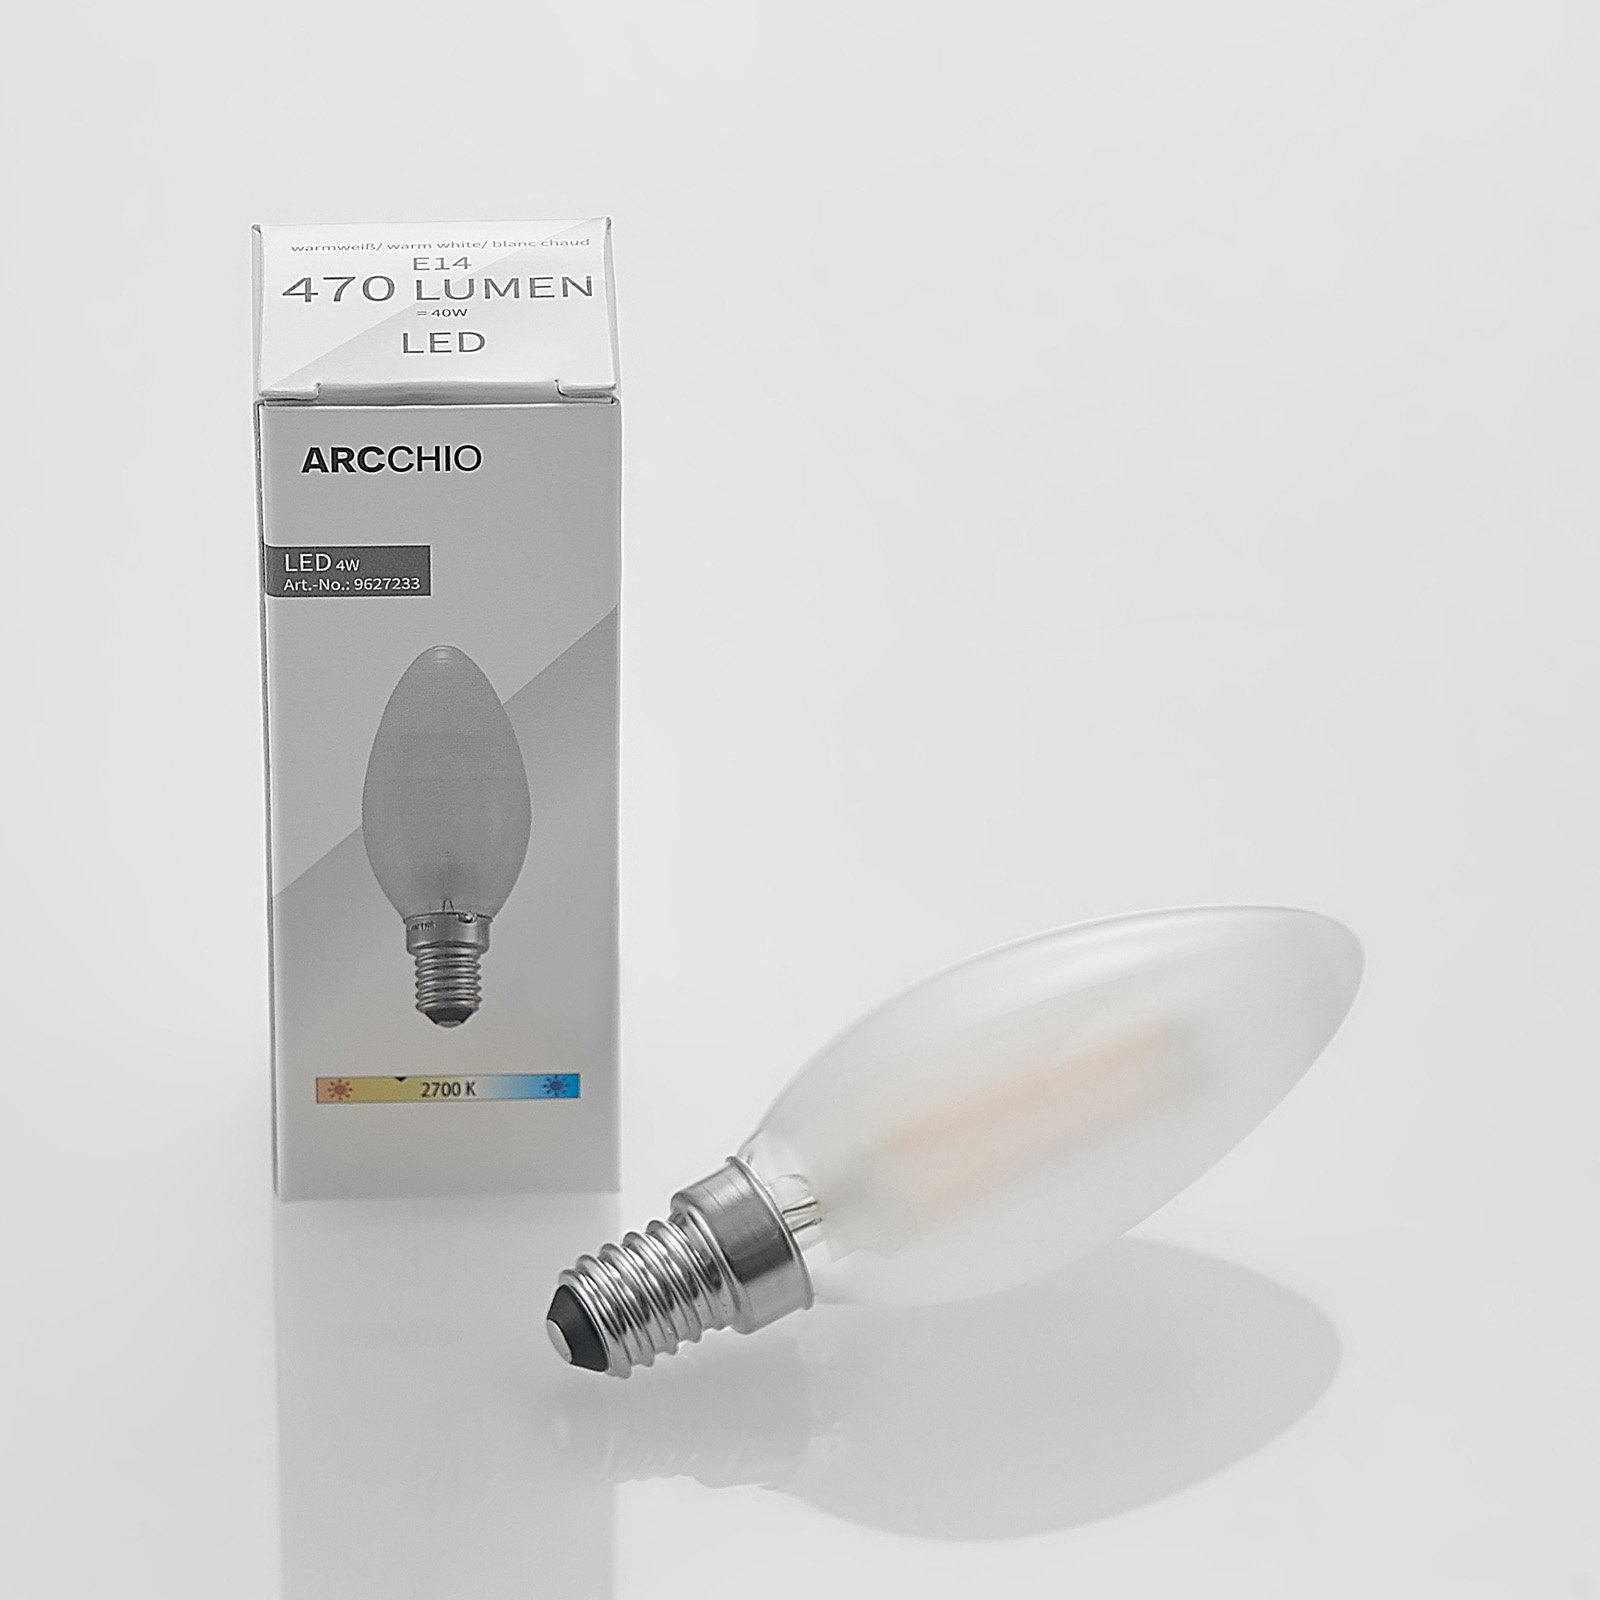 Ampoule LED E14 4 W 2 700 K bougie, dimmable, mate